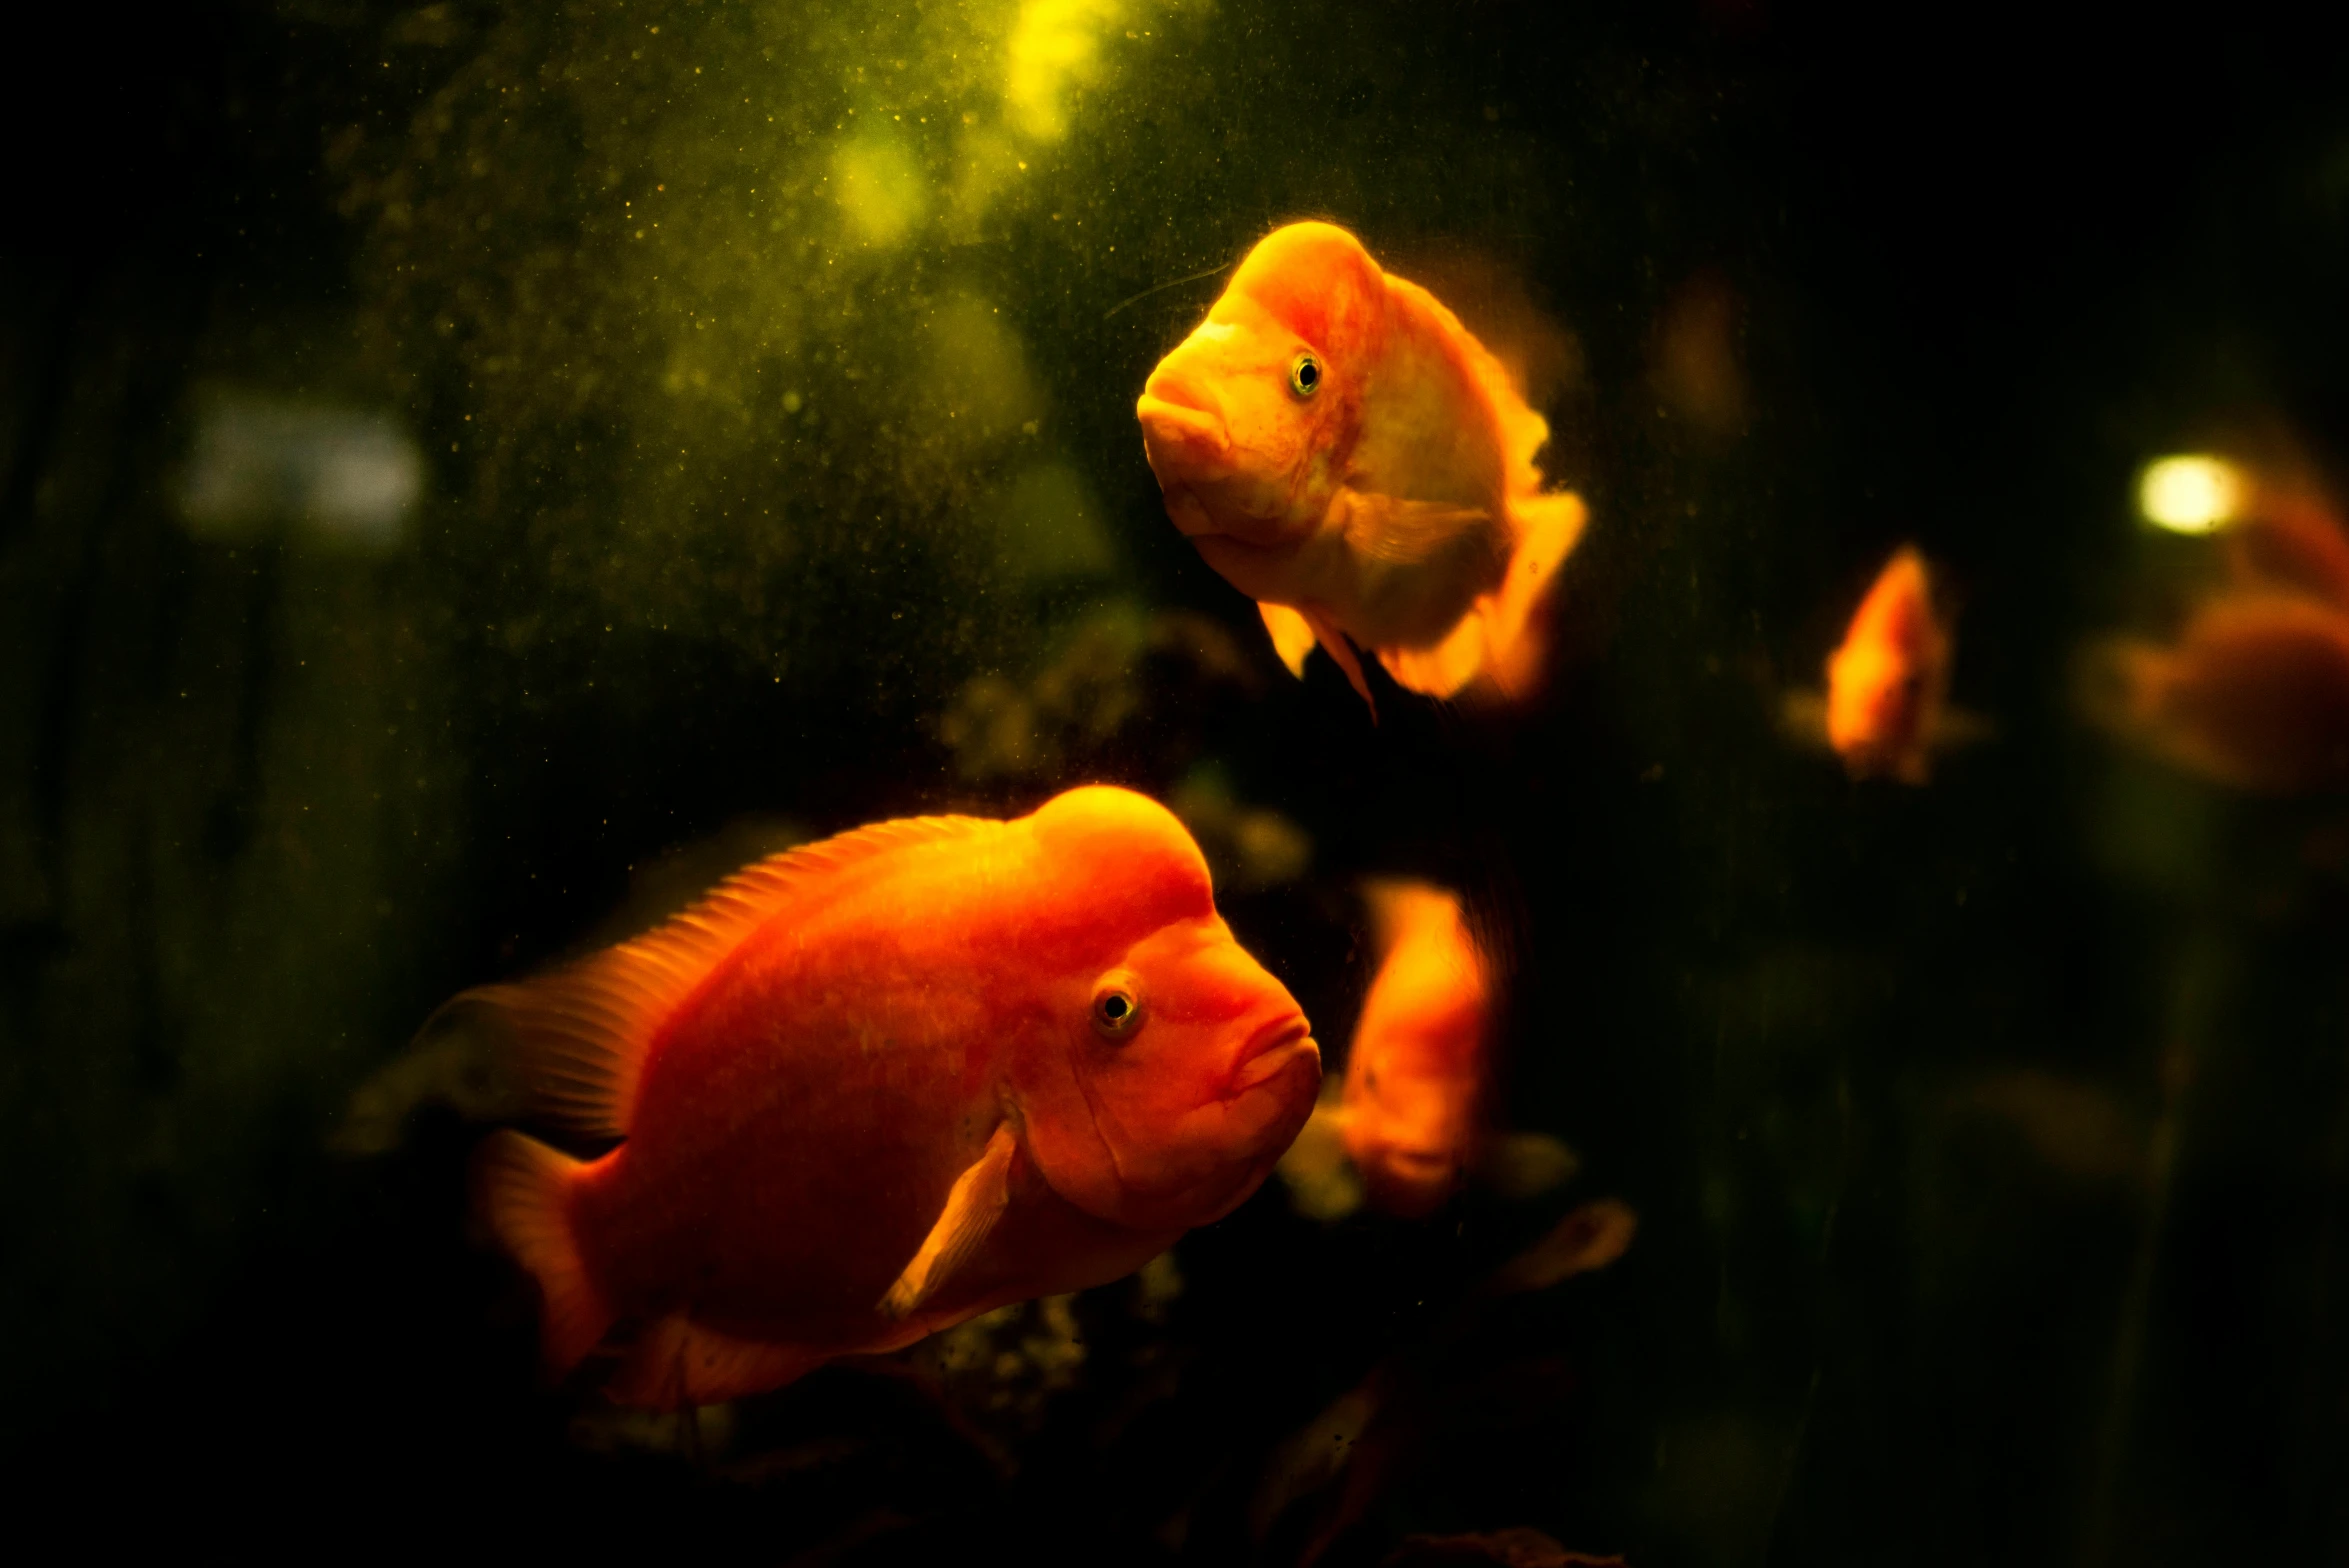 a group of fish swimming in an aquarium, an album cover, pexels, romanticism, fluffy orange skin, adult pair of twins, low - lighting, red yellow